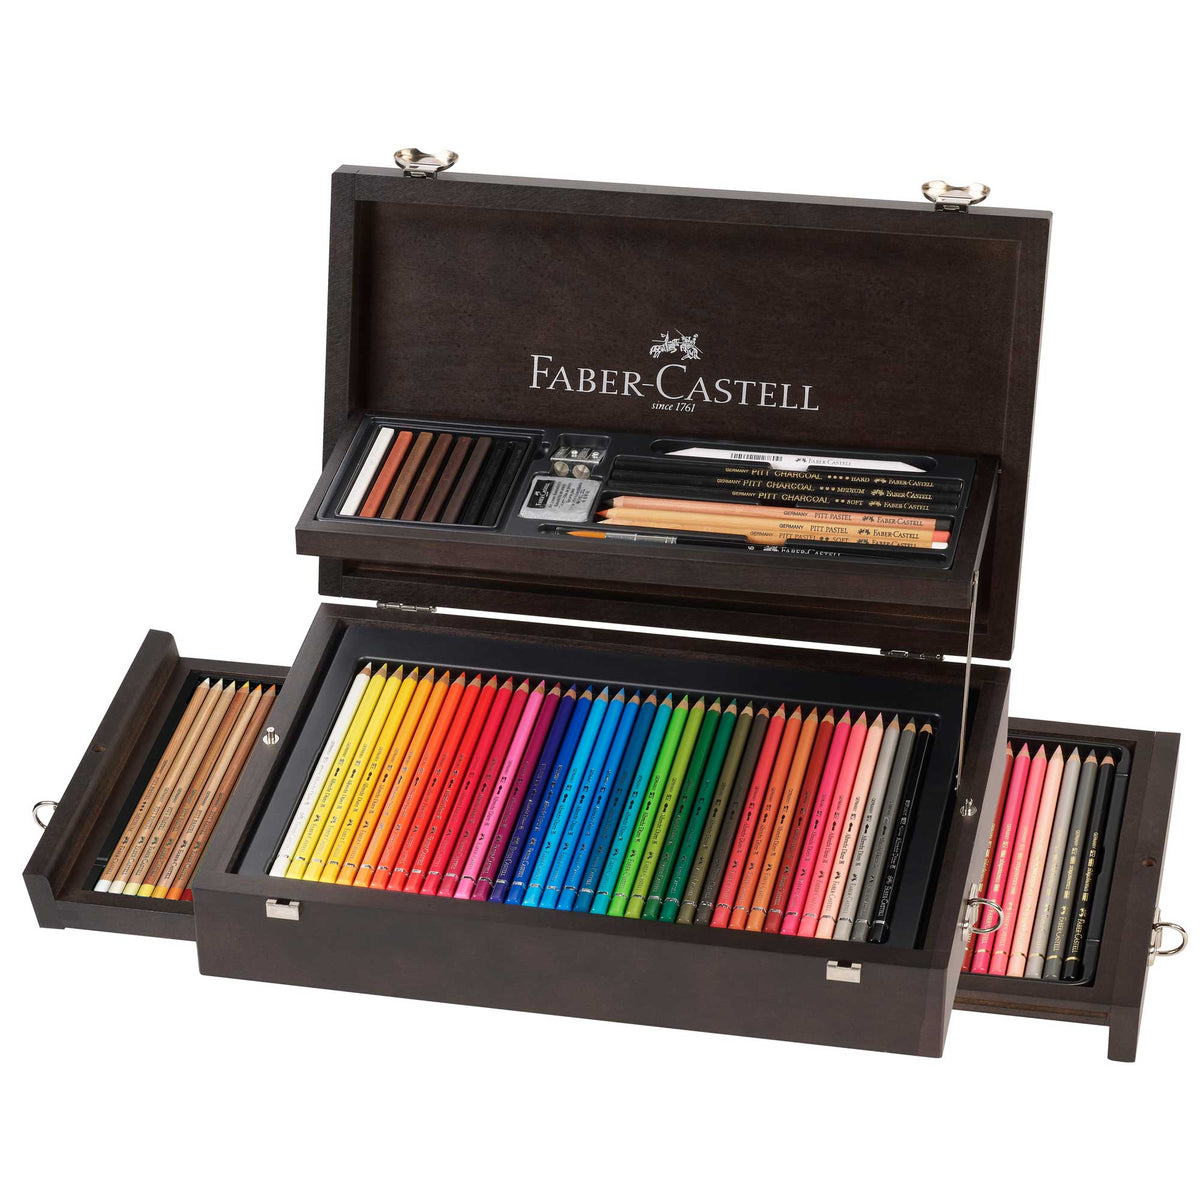 Faber-Castell Art &amp; Graphic Collection Wooden Case - 125 Pieces - Includes Complimentary Artist&#39;s Apron